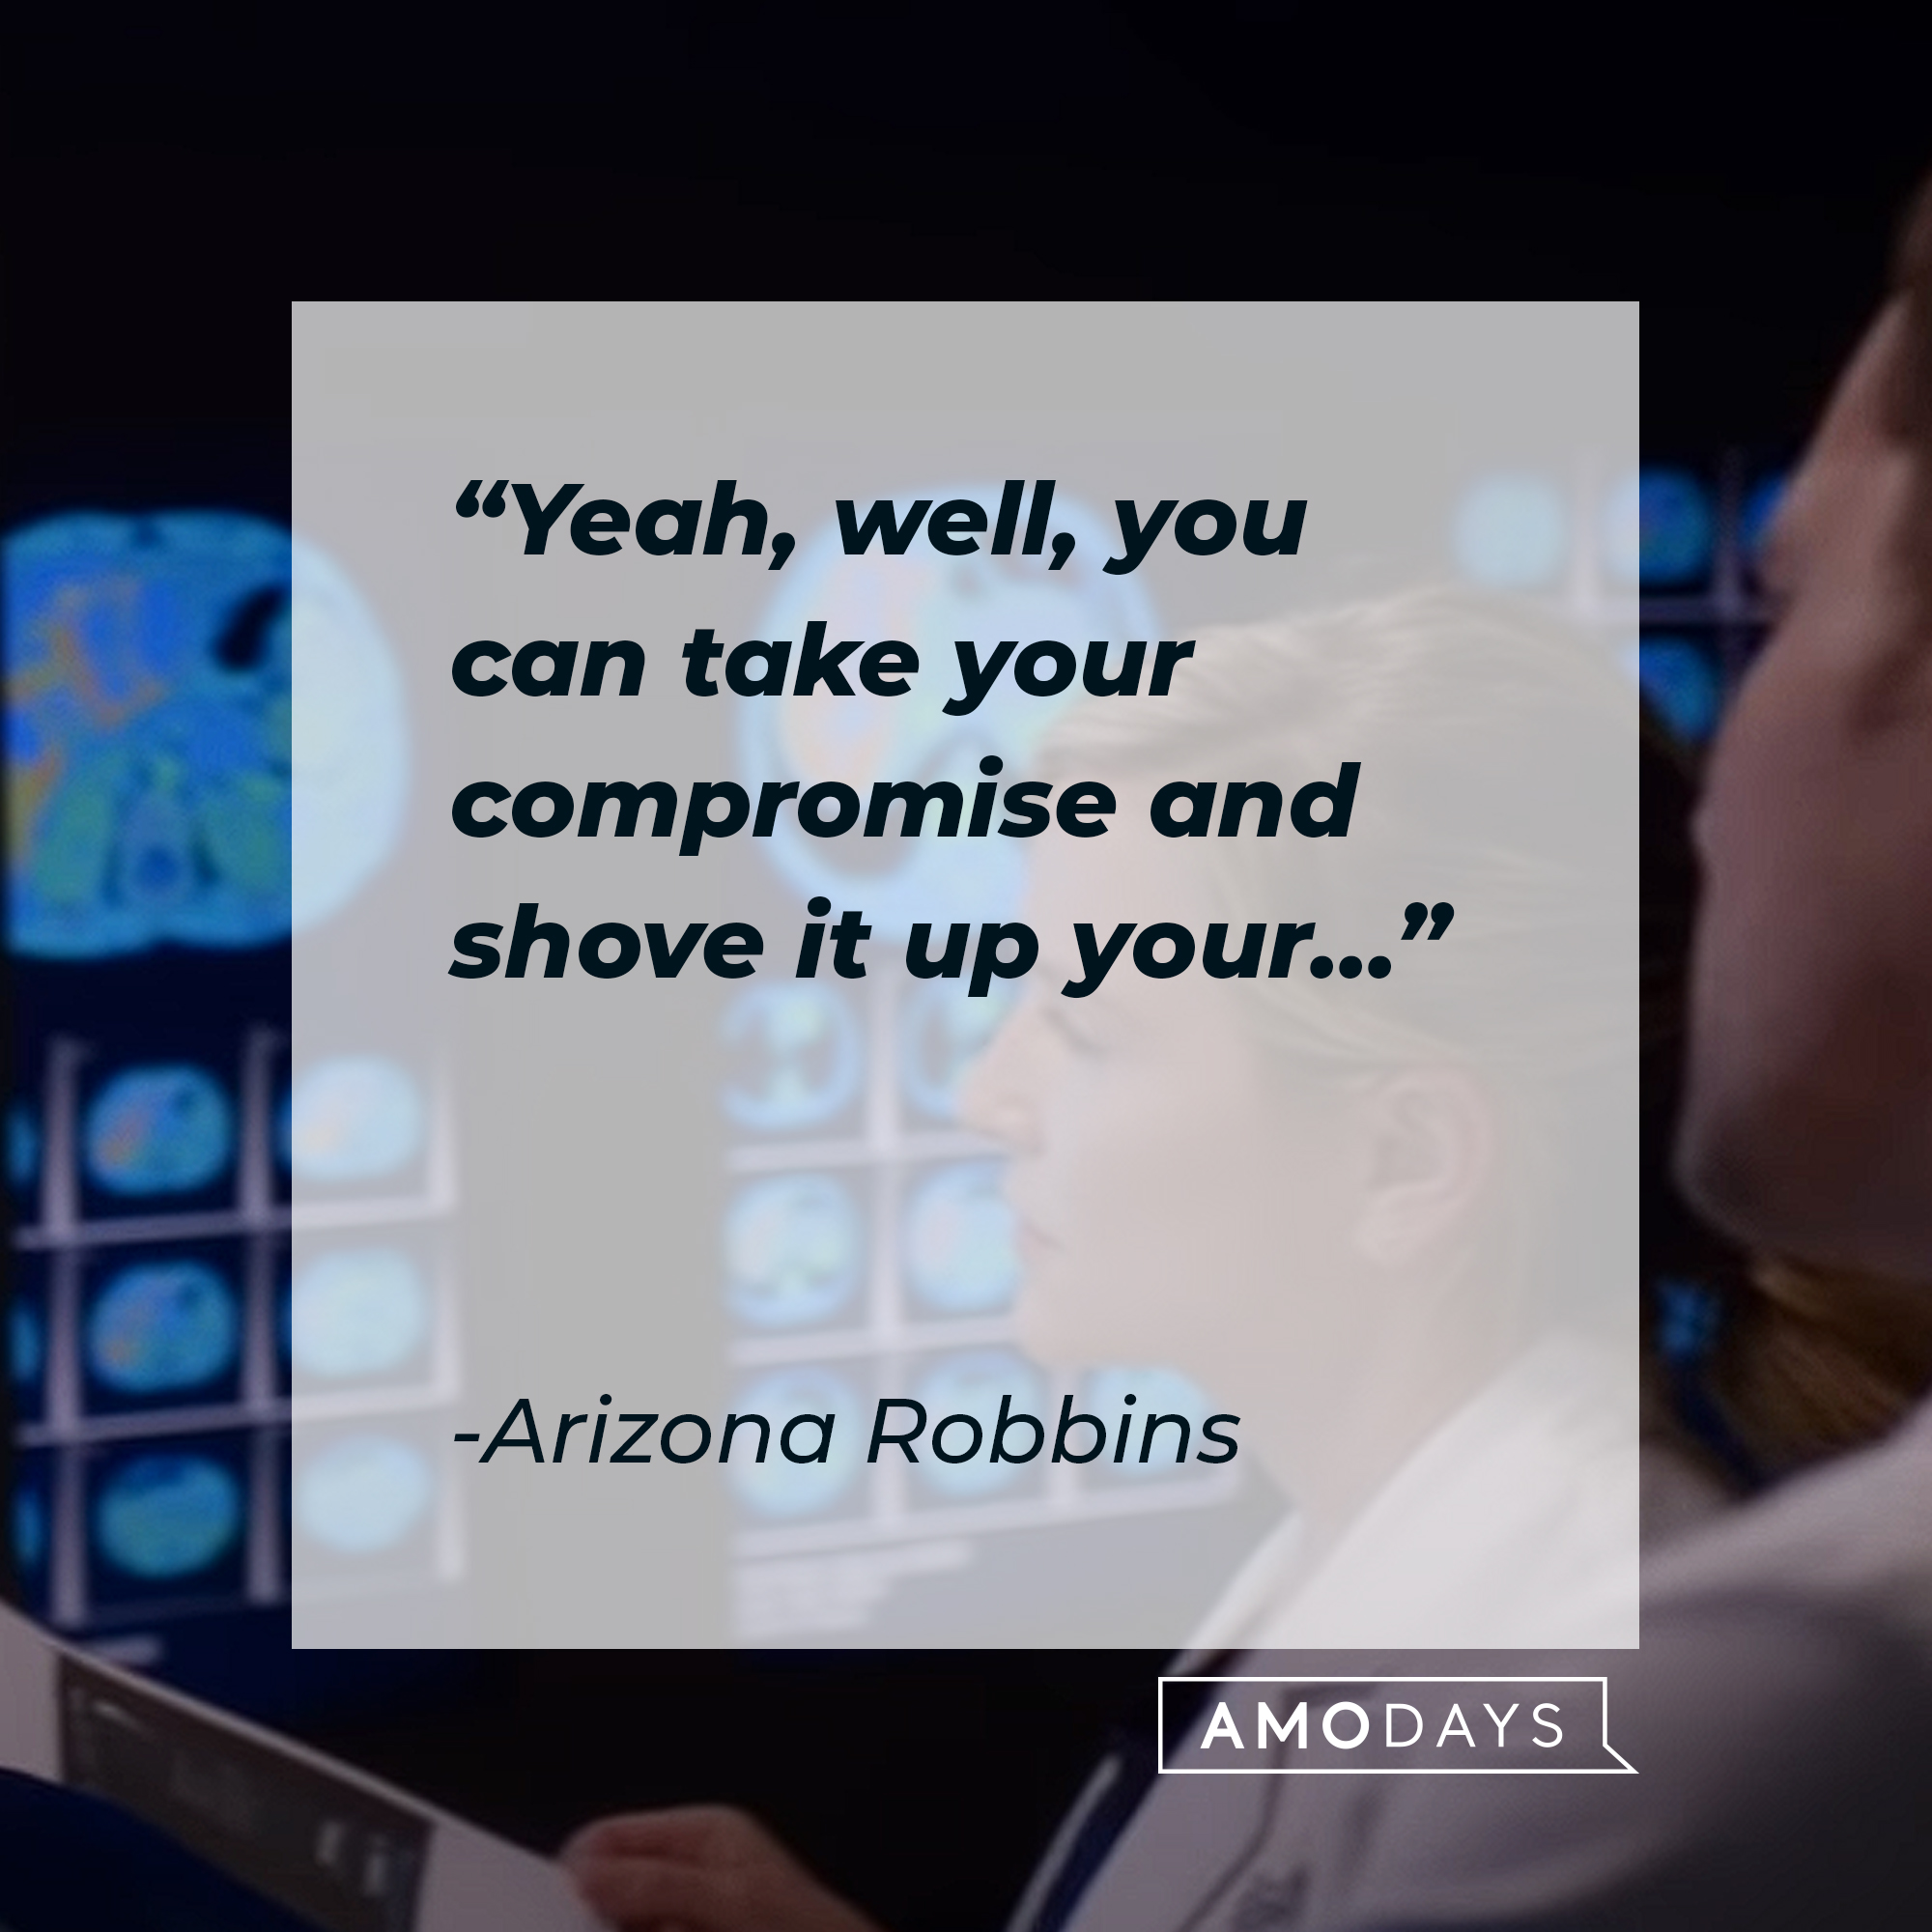 A picture of Arizona Robbins with her quote: “Yeah, well, you can take your compromise and shove it up your….”  | Image: AmoDays